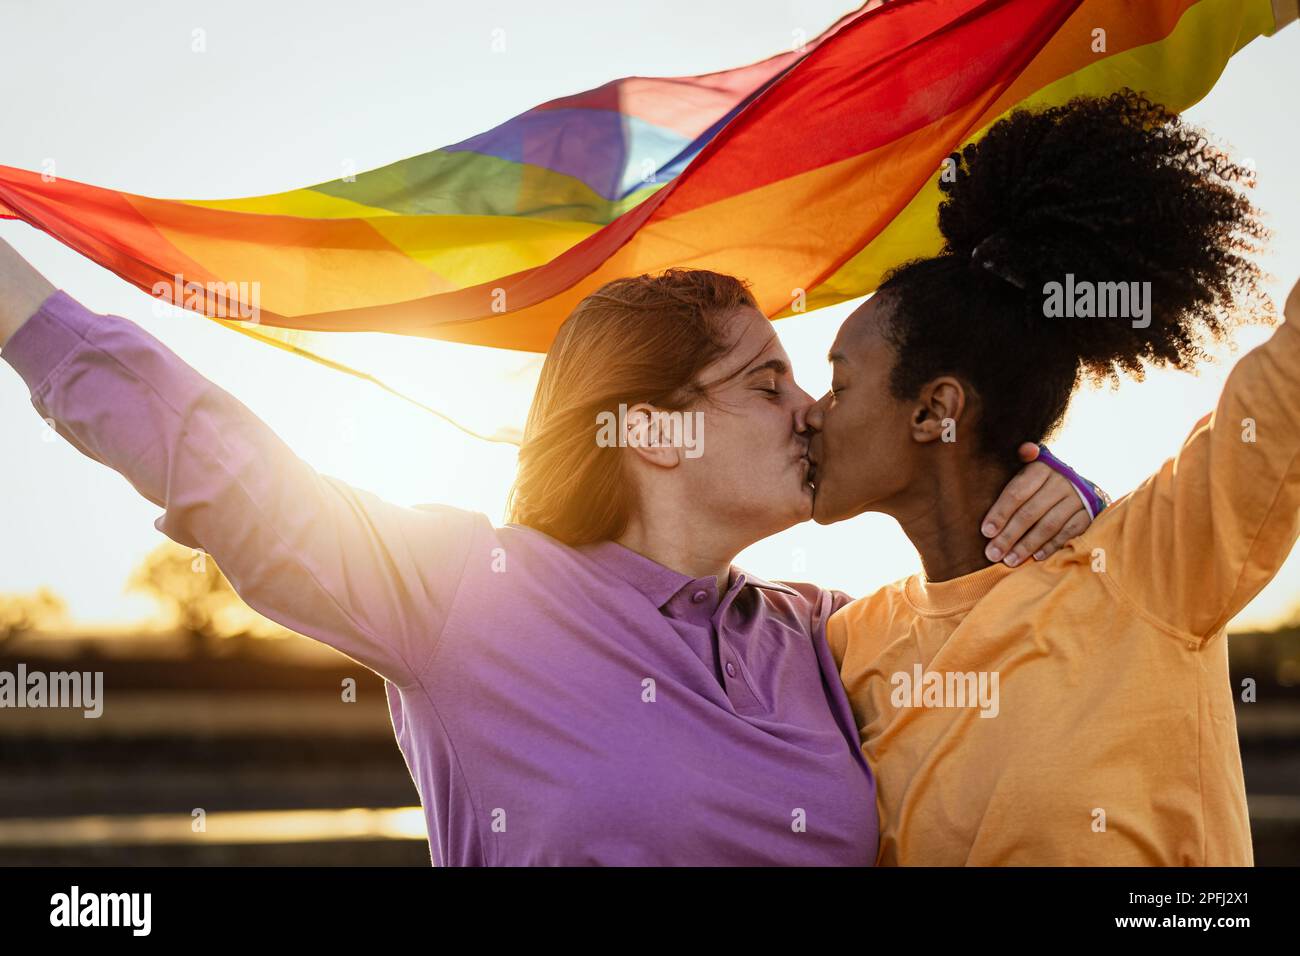 Lesbian couple kissing while holding rainbow flag during gay pride celebration outdoor - Lgbt and love equality concept Stock Photo